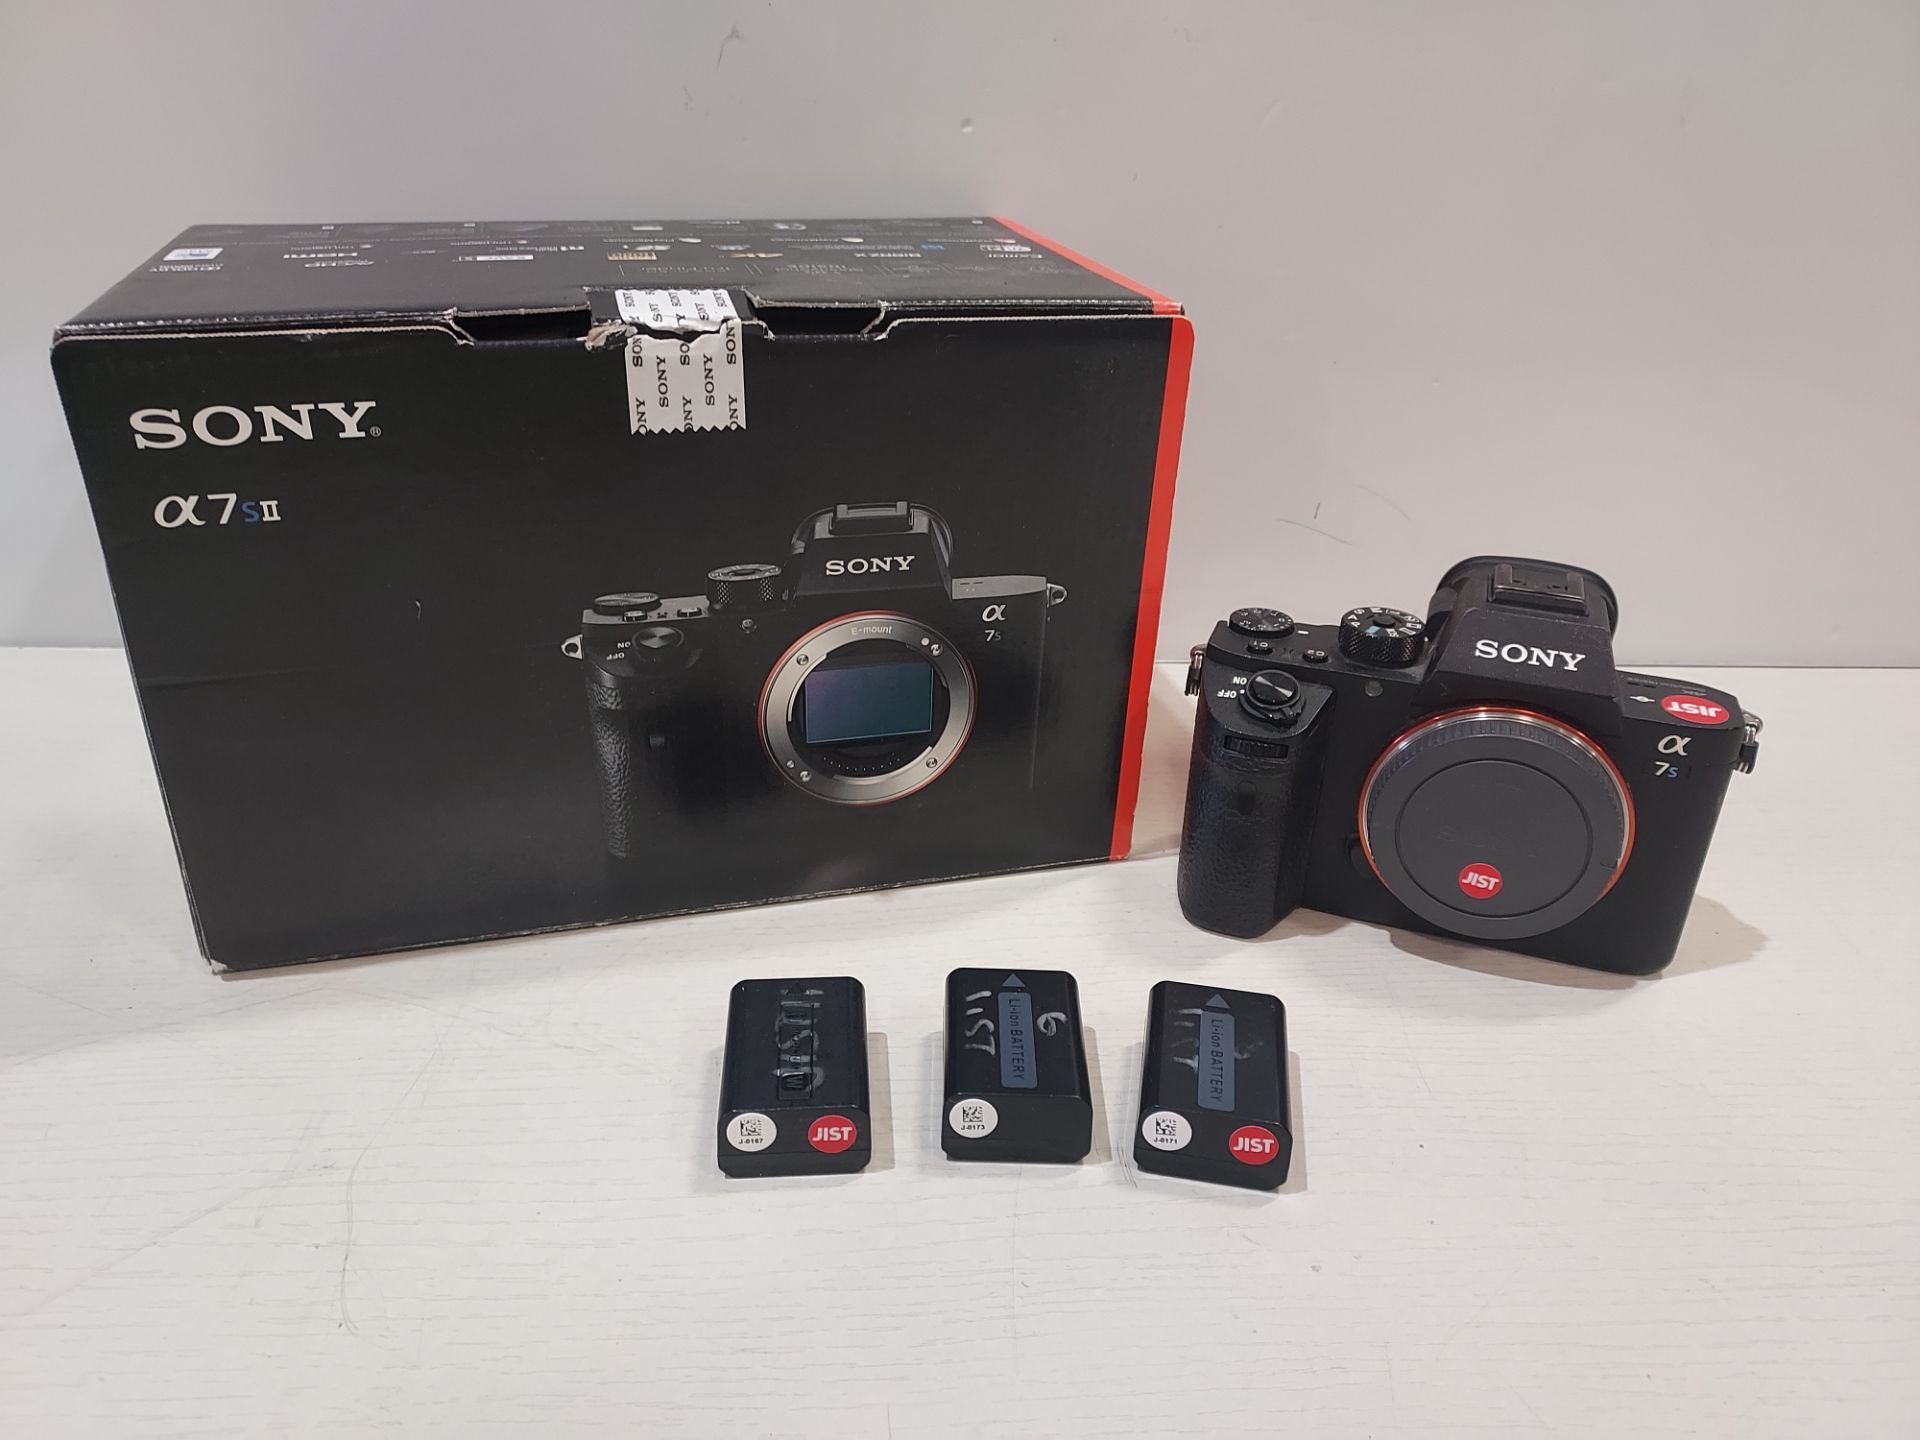 SONY A7S II HYBRID STILLS AND VIDEO MIRRORLESSS INTERCHANGEABLE LENS CAMERA WITH SPARE BATTERIES & - Image 2 of 3